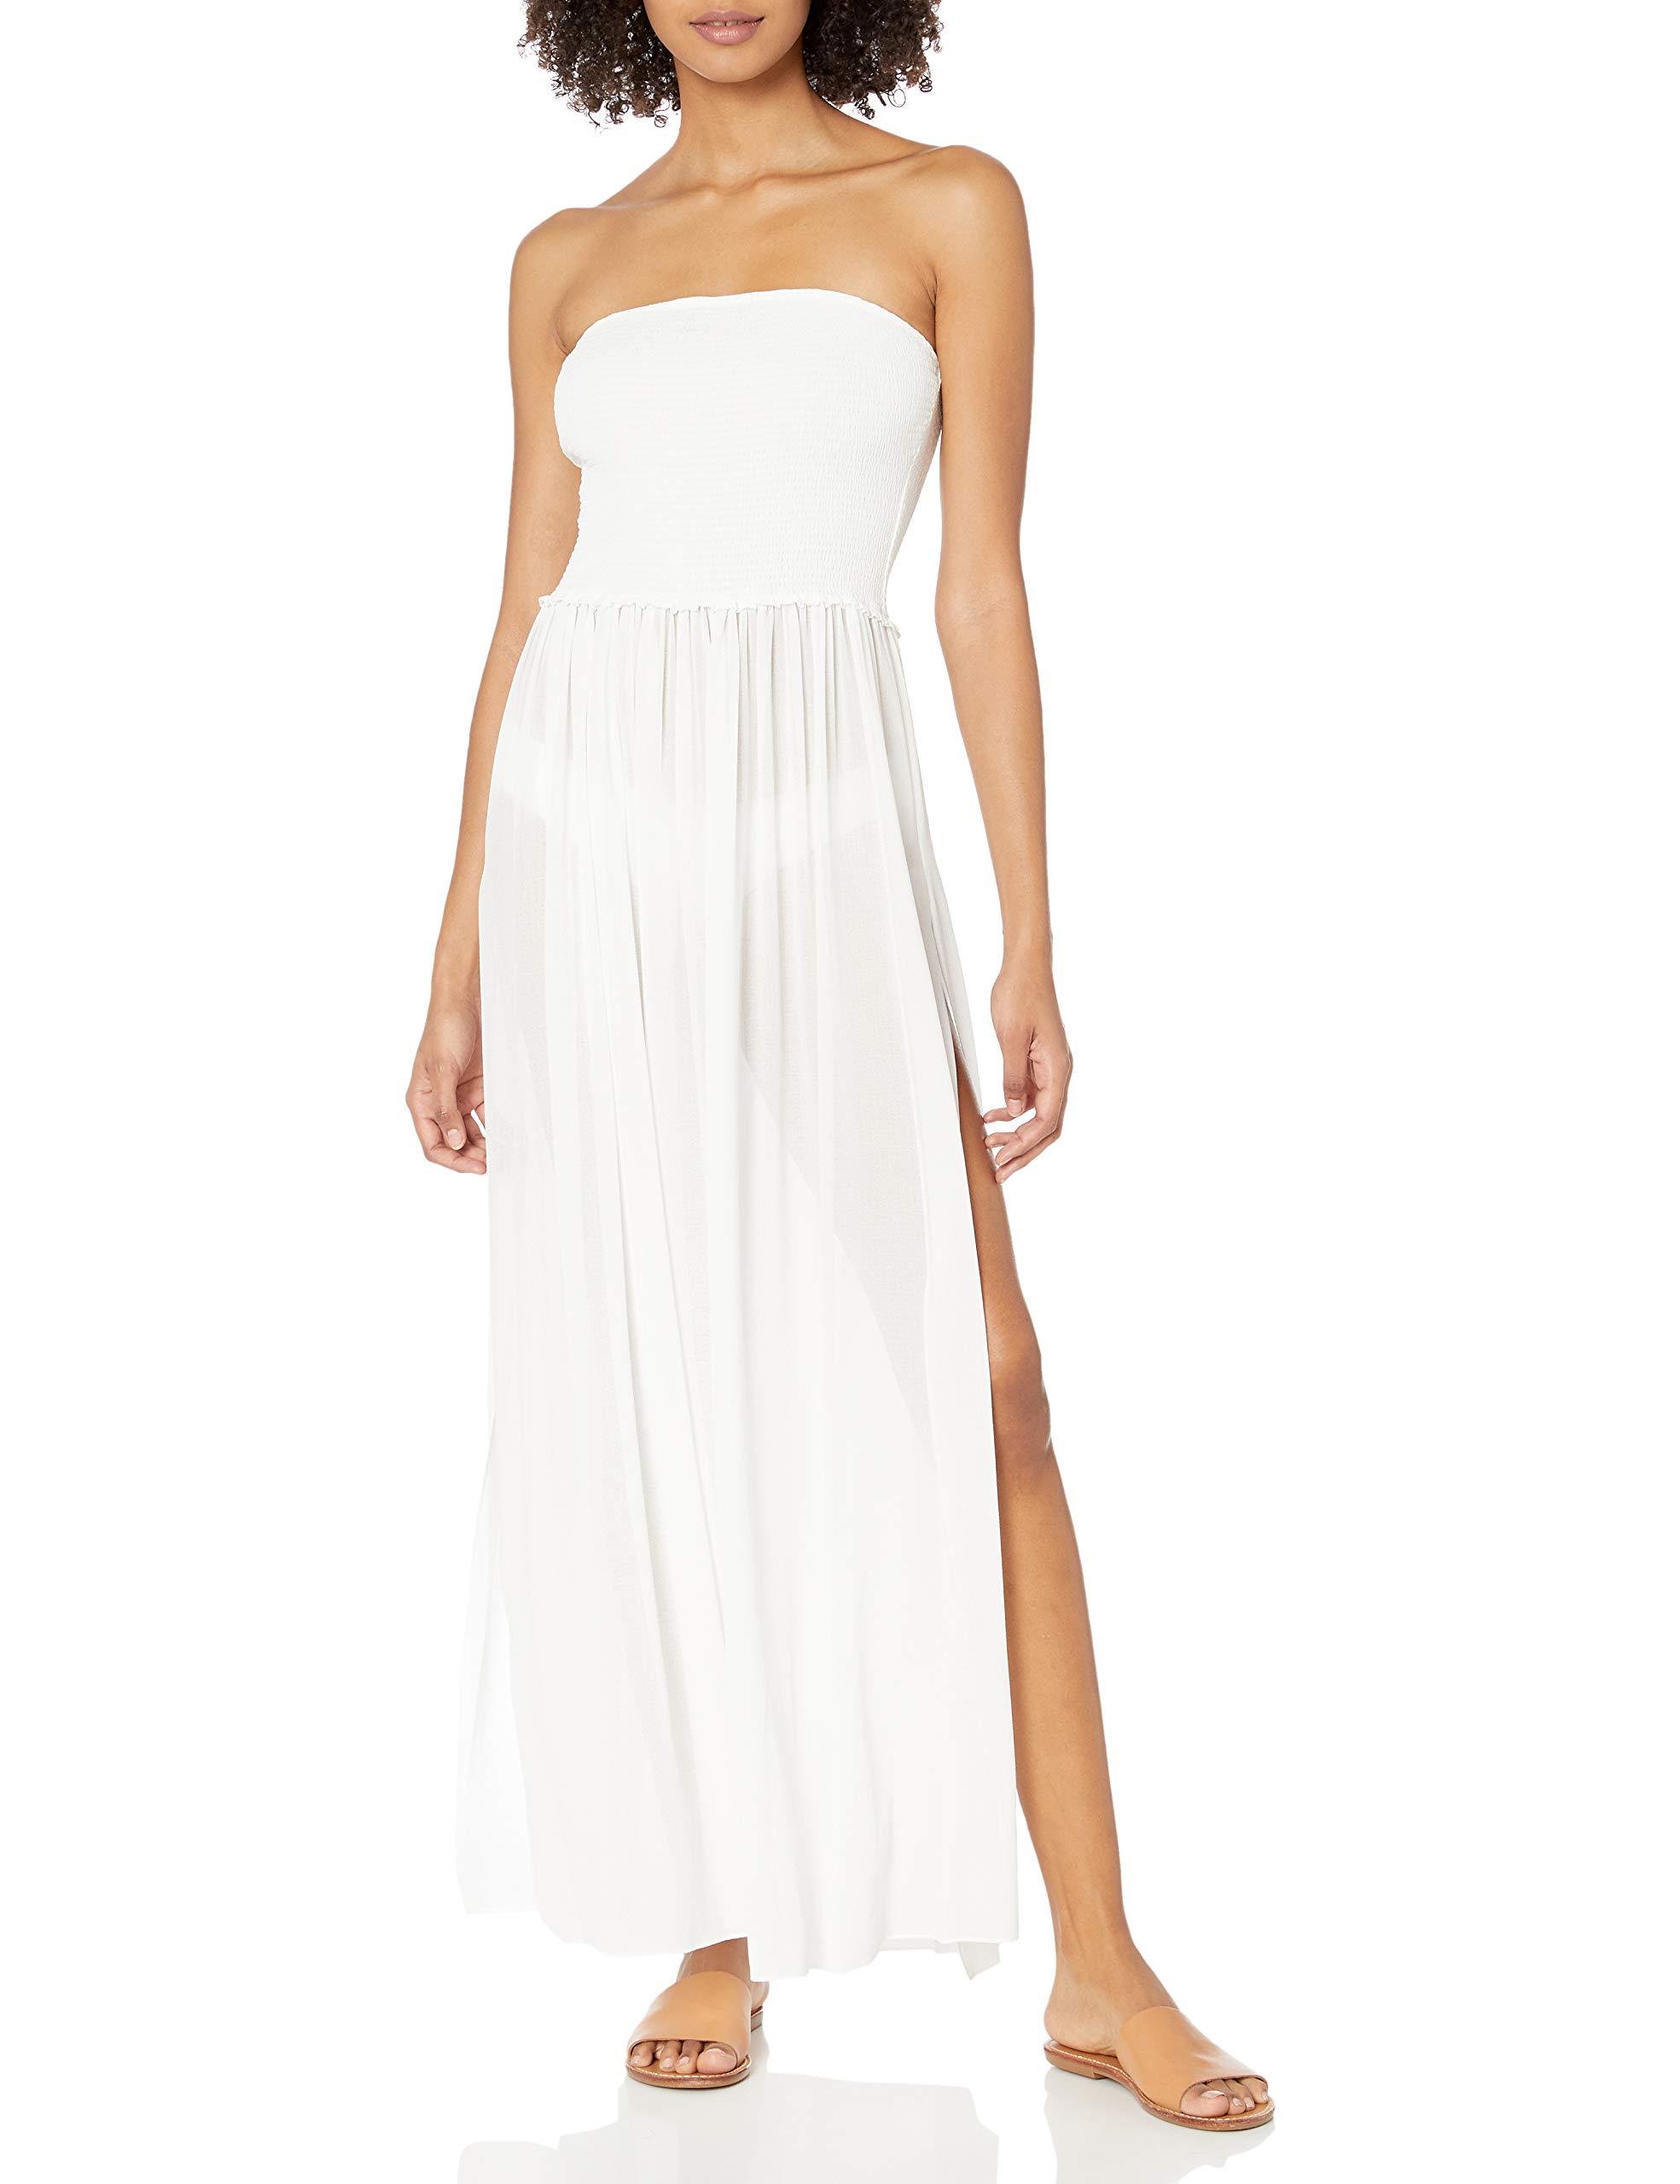 Ramy Brook Calista Smocked Maxi Dress in White - Lyst